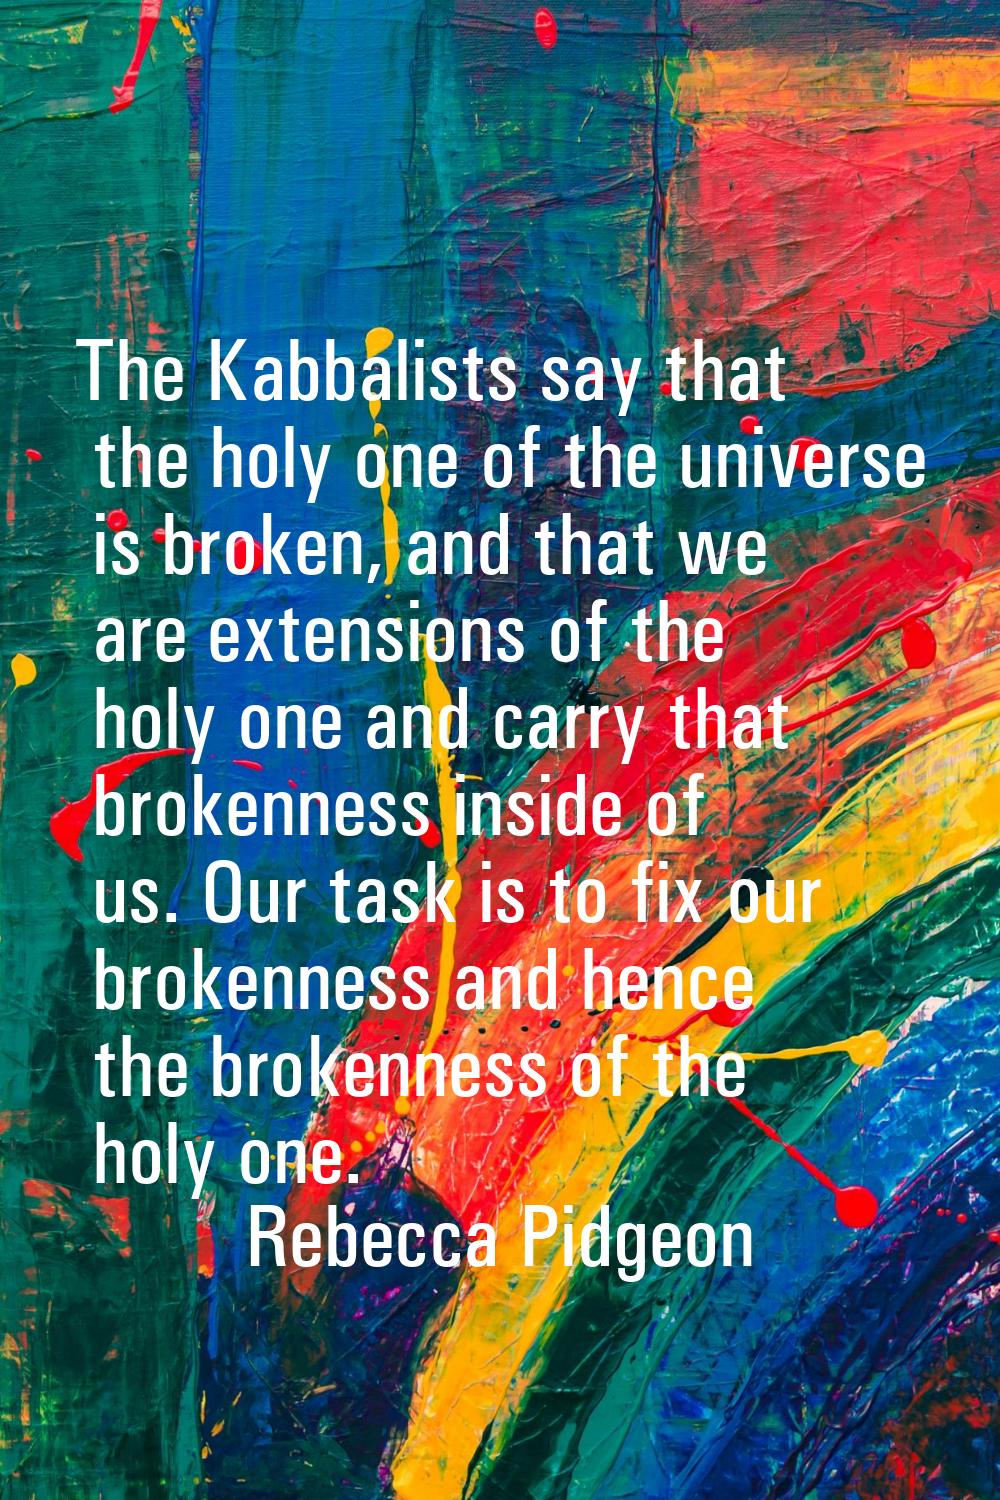 The Kabbalists say that the holy one of the universe is broken, and that we are extensions of the h